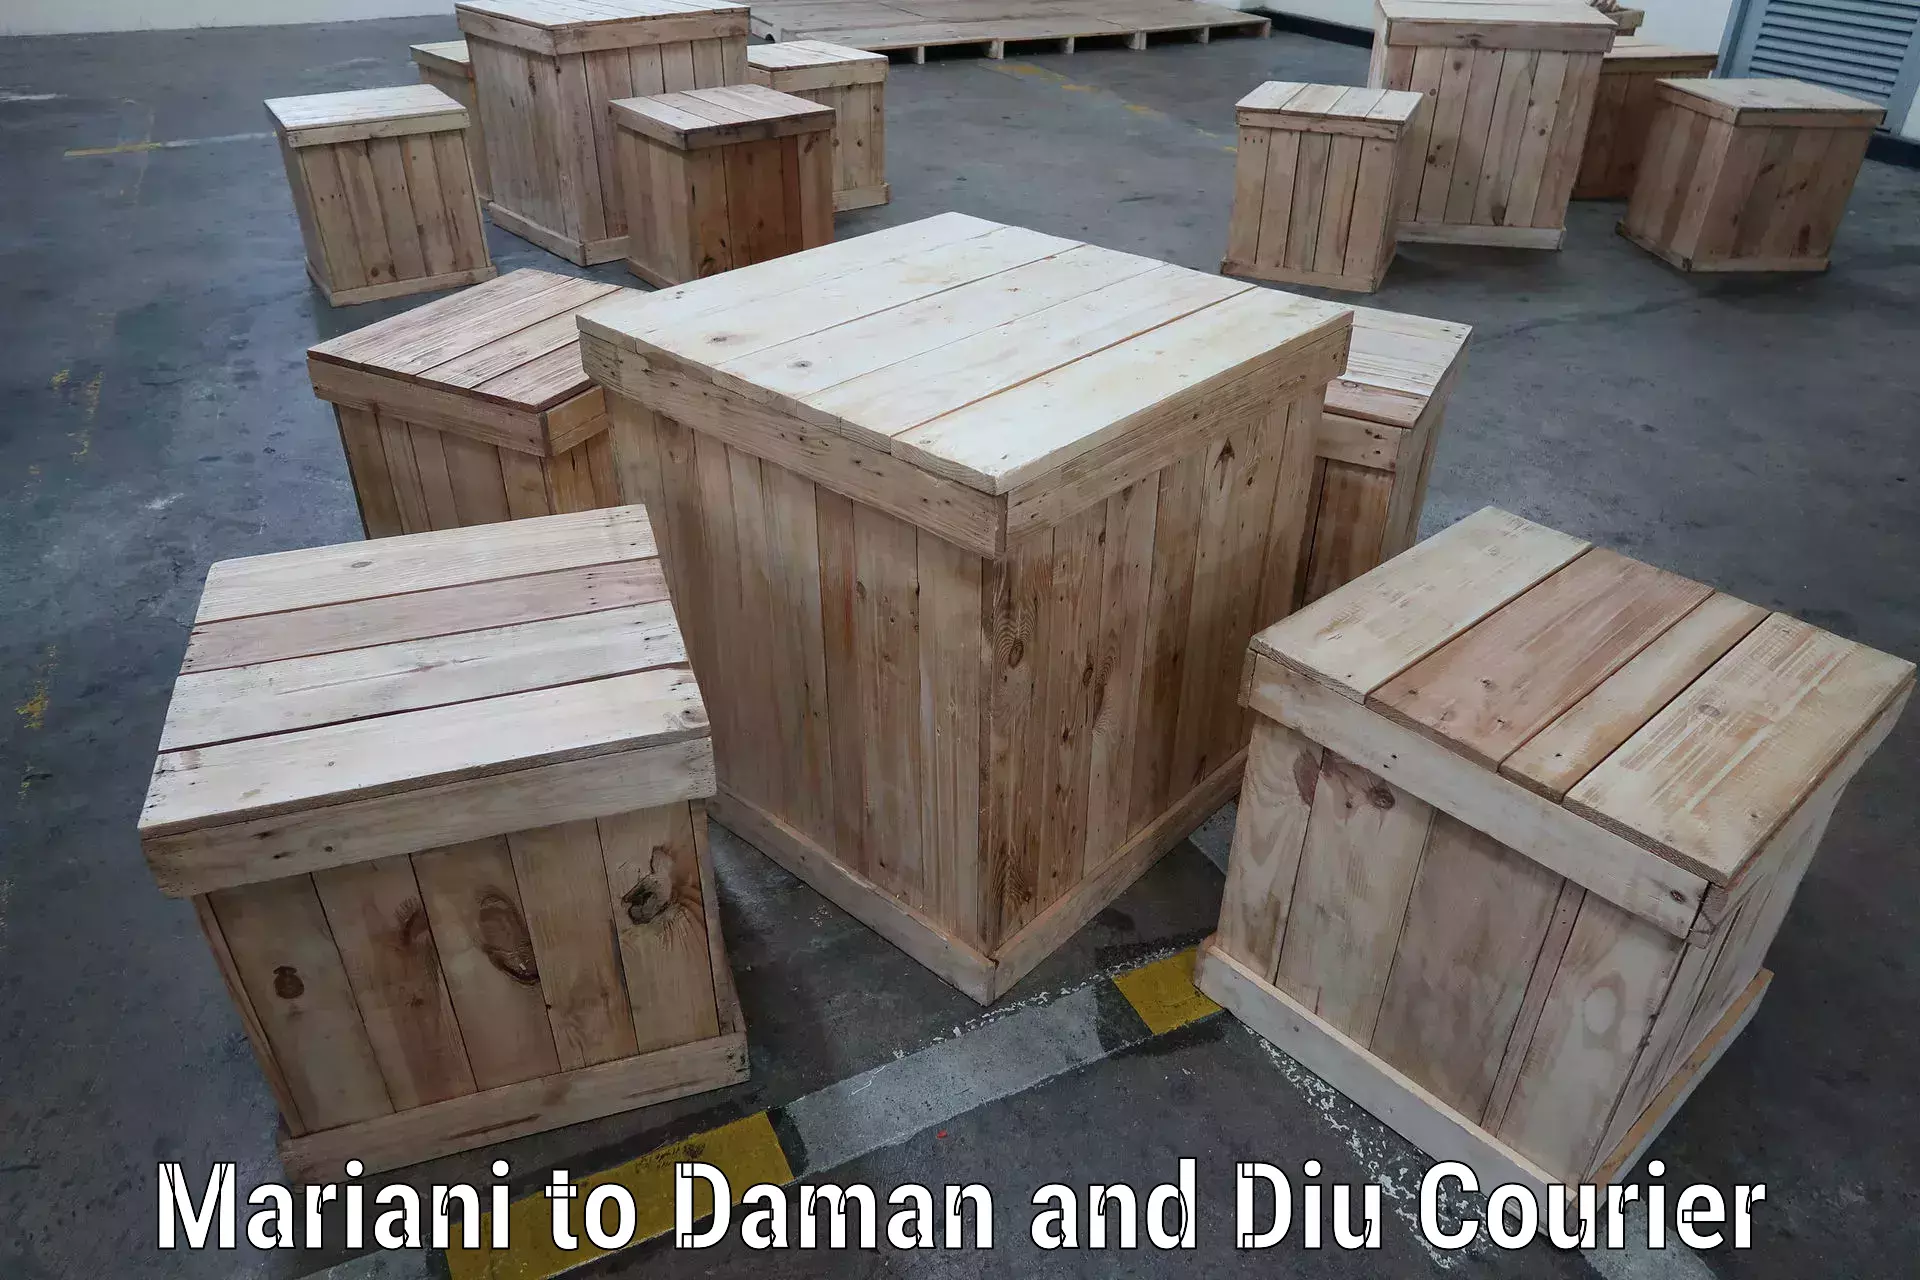 Multi-national courier services Mariani to Daman